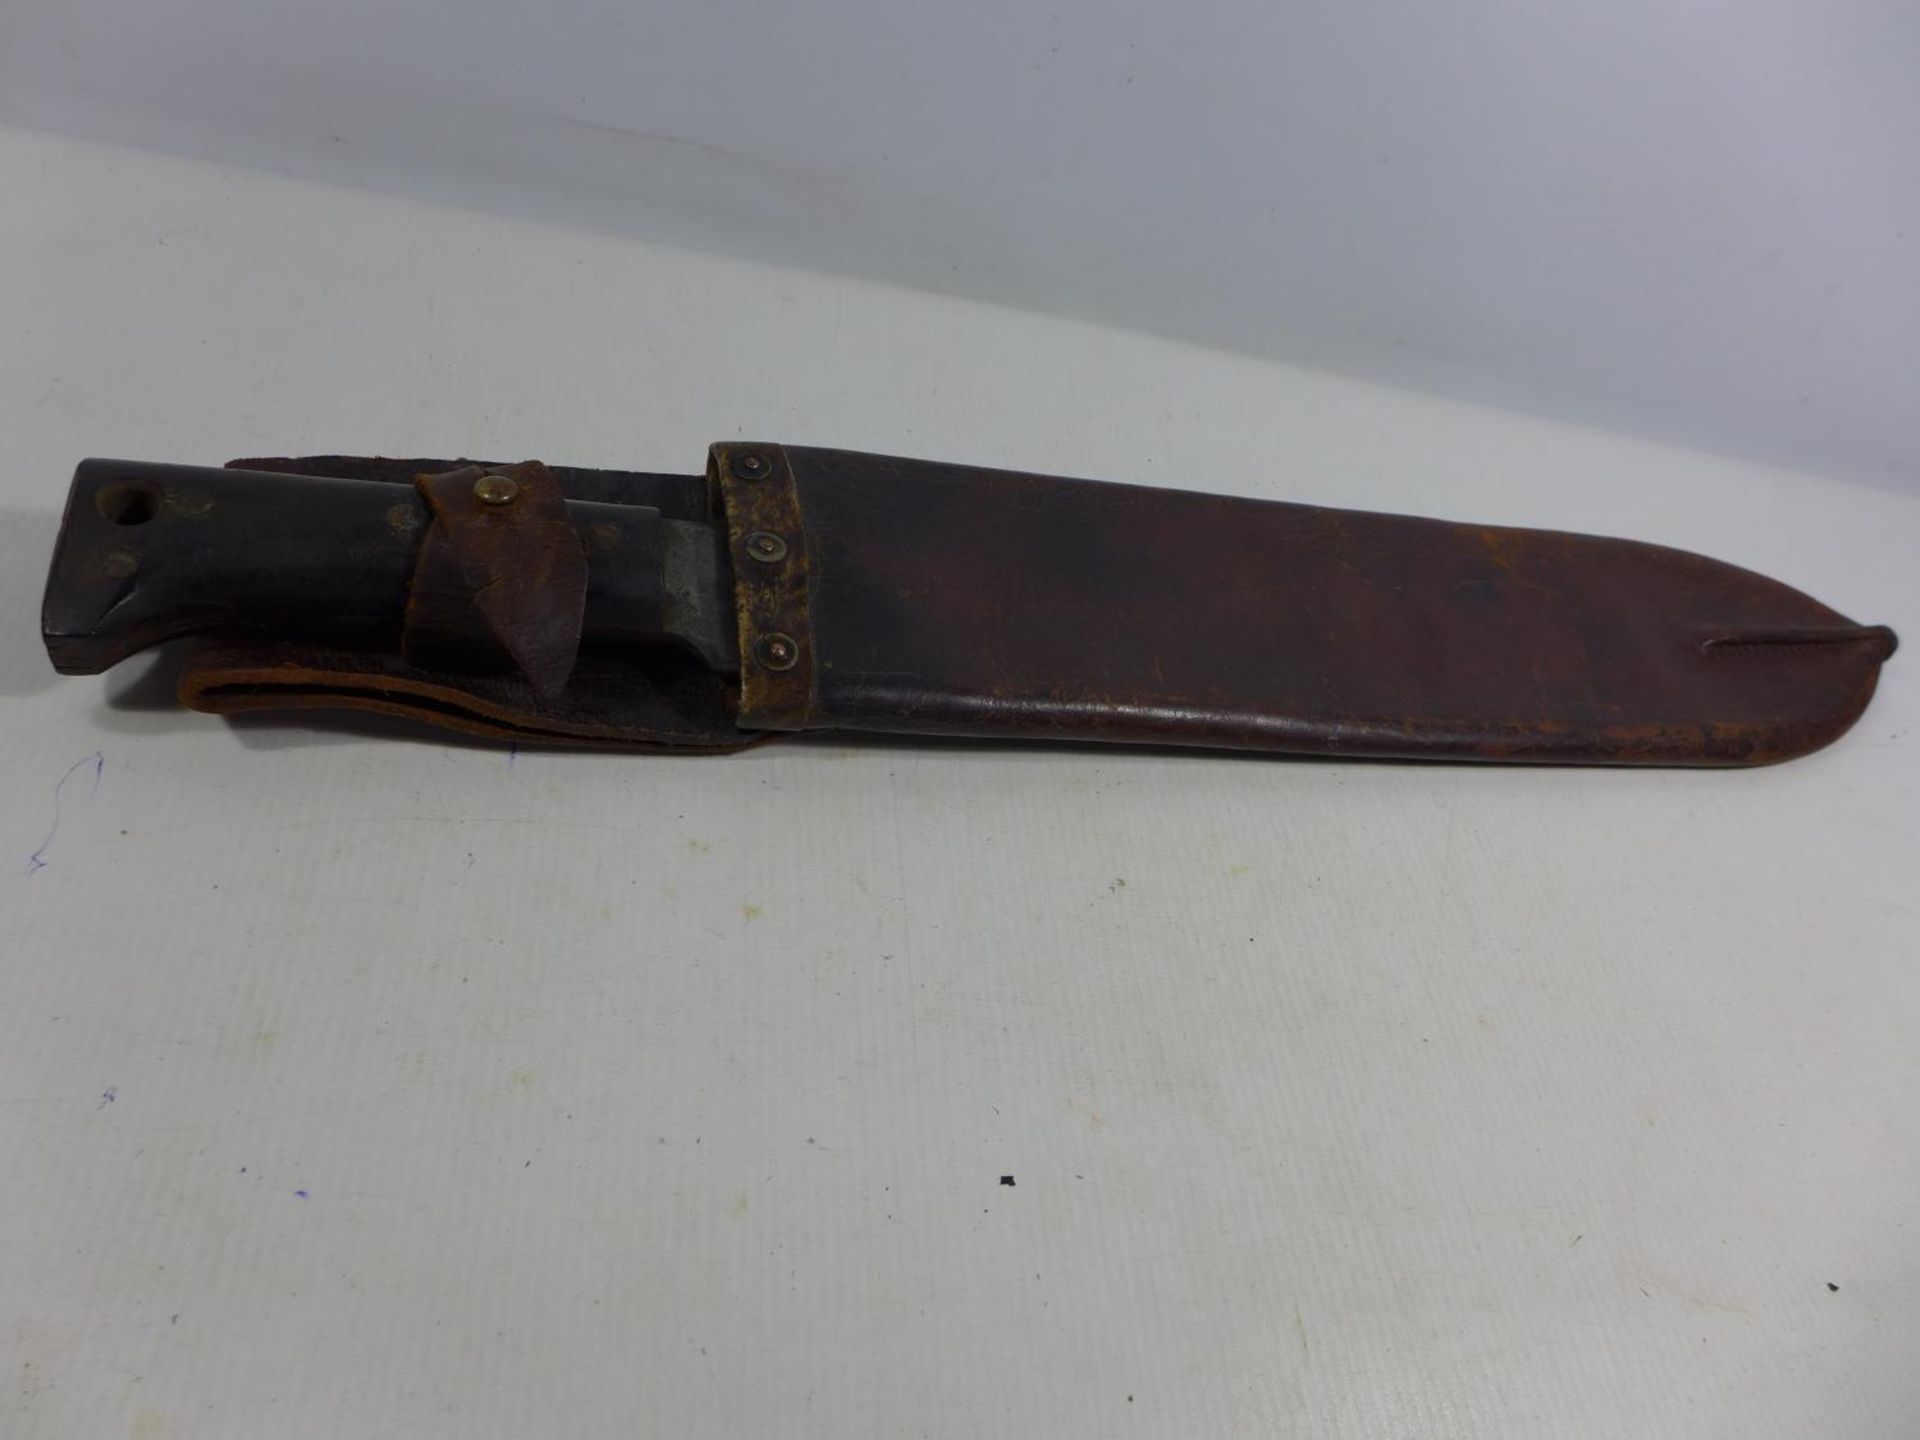 A WORLD WAR II MILITARY MACHETTE AND SCABBARD DATED 1940, 37CM BLADE - Image 5 of 5